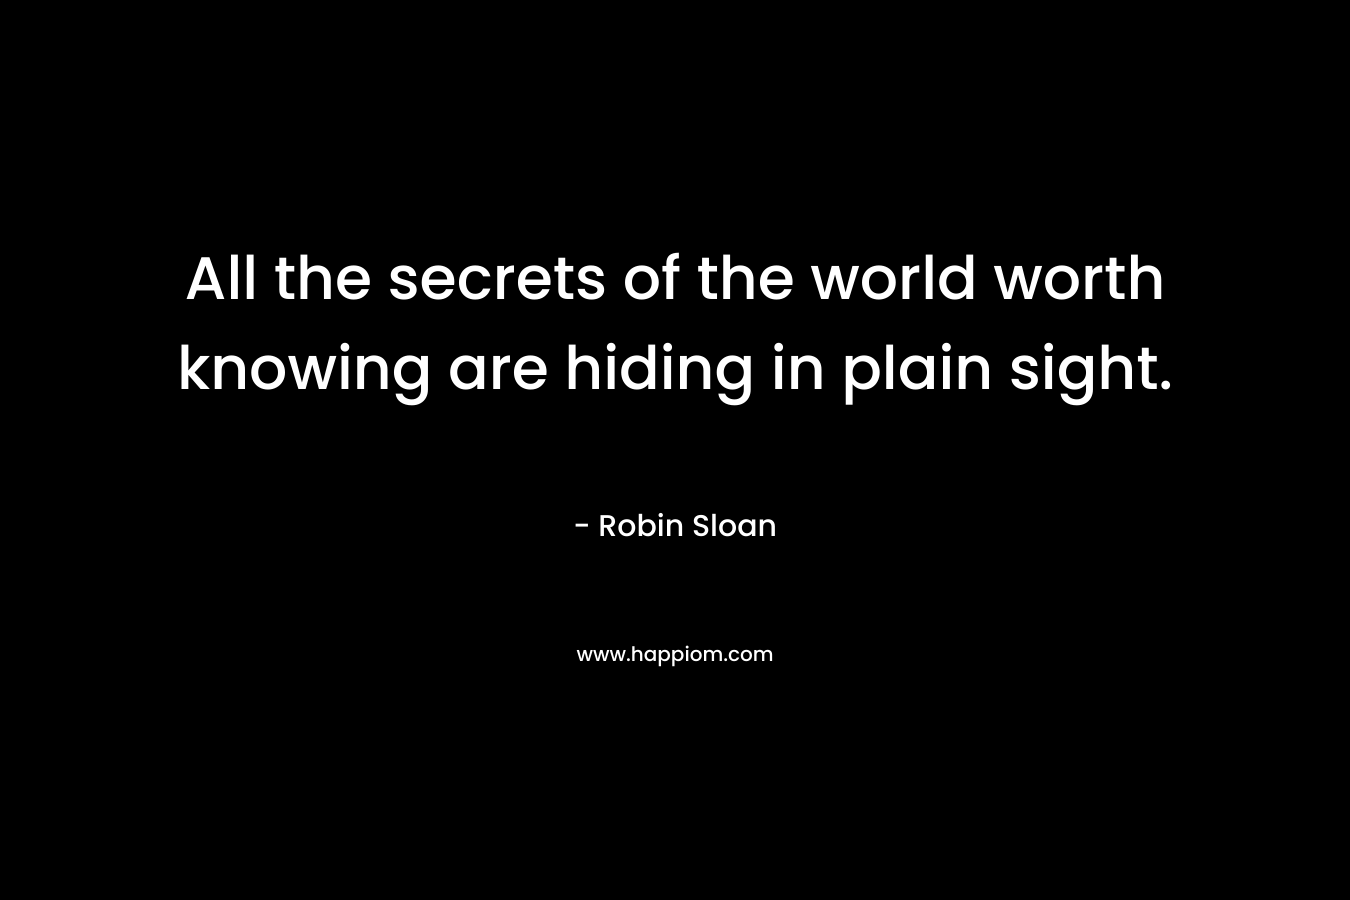 All the secrets of the world worth knowing are hiding in plain sight. – Robin Sloan